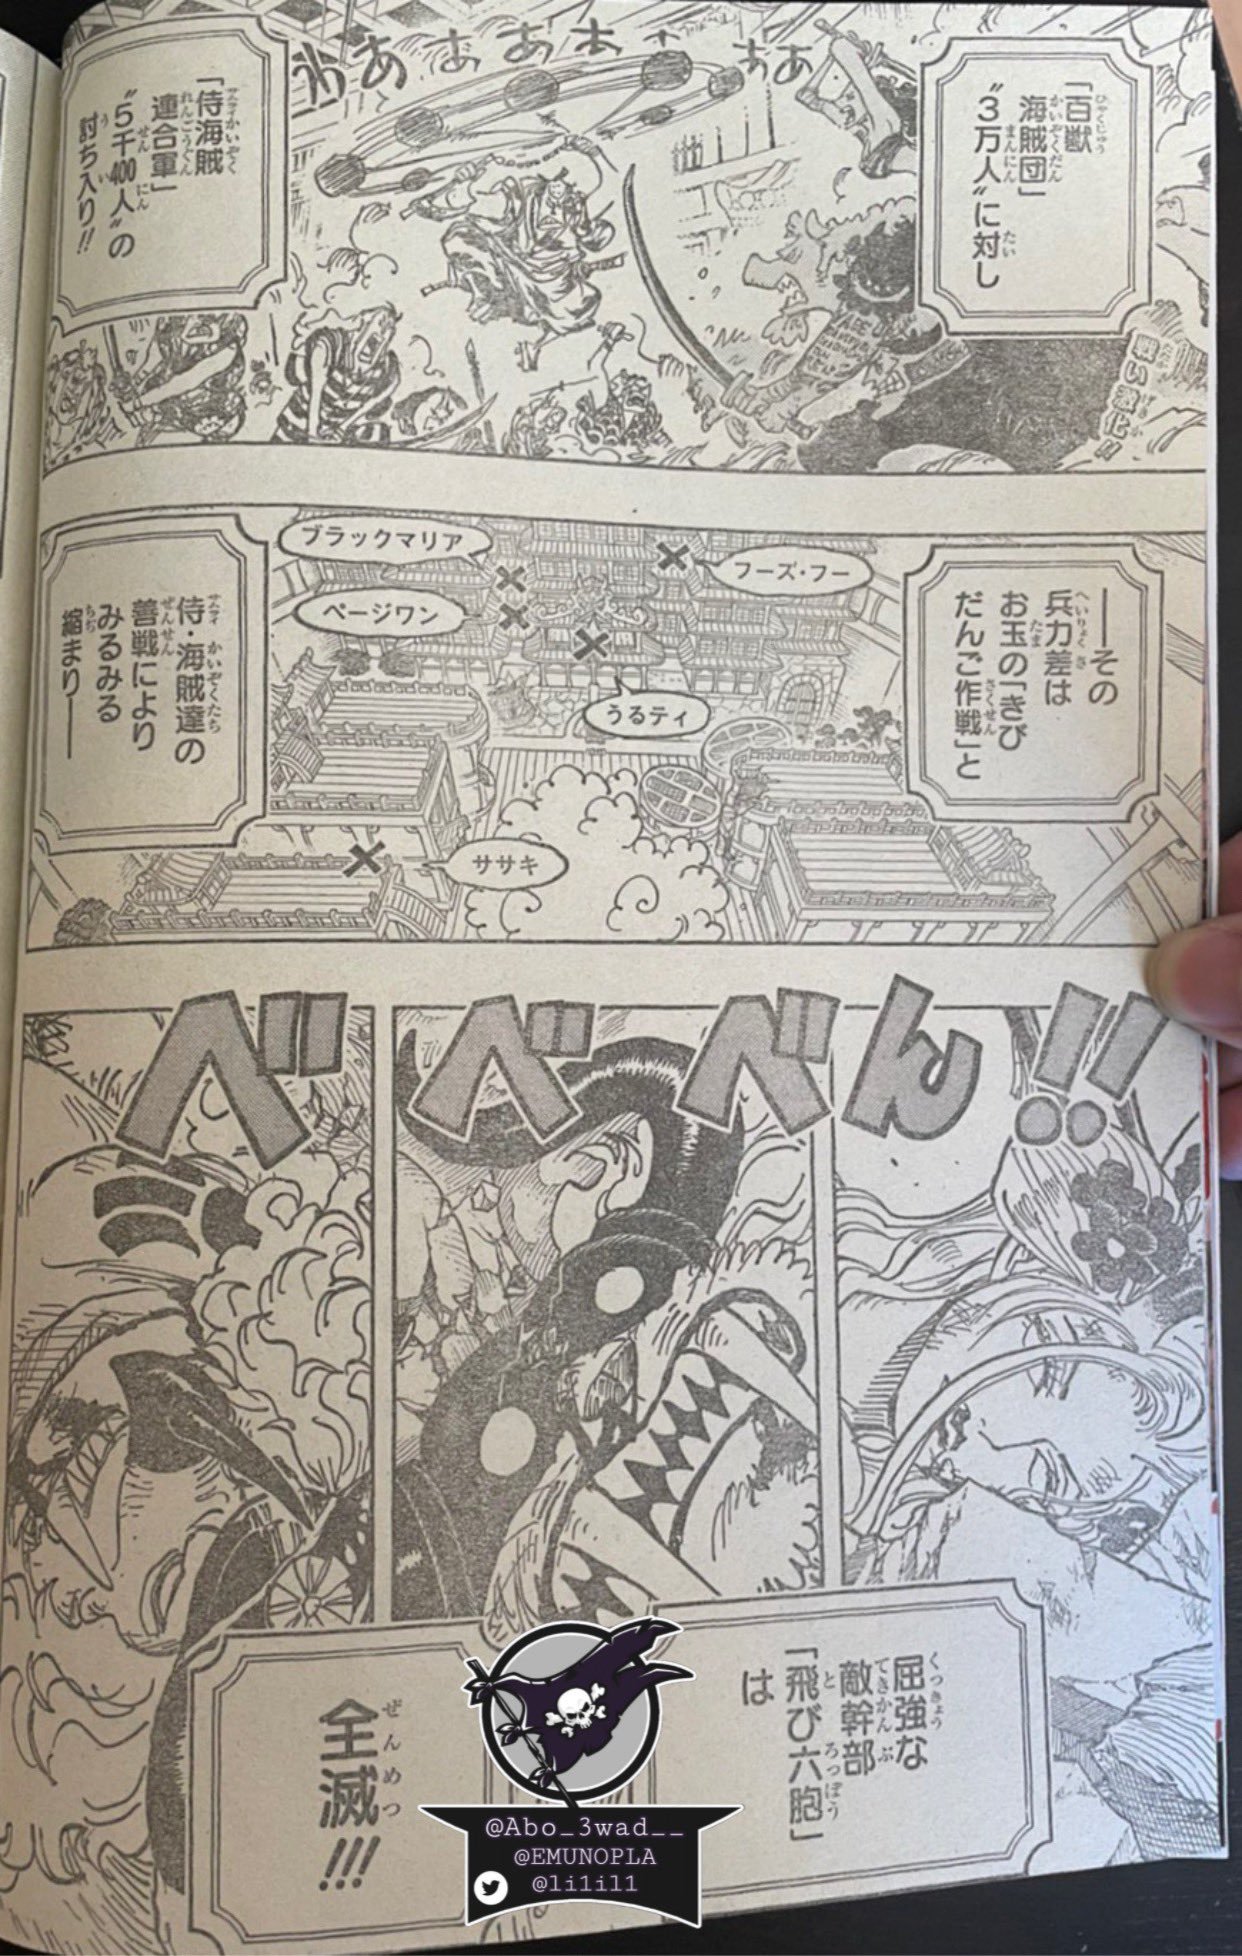 OPspoiler on X: One Piece Chapter 1022 Spoiler #onepiece